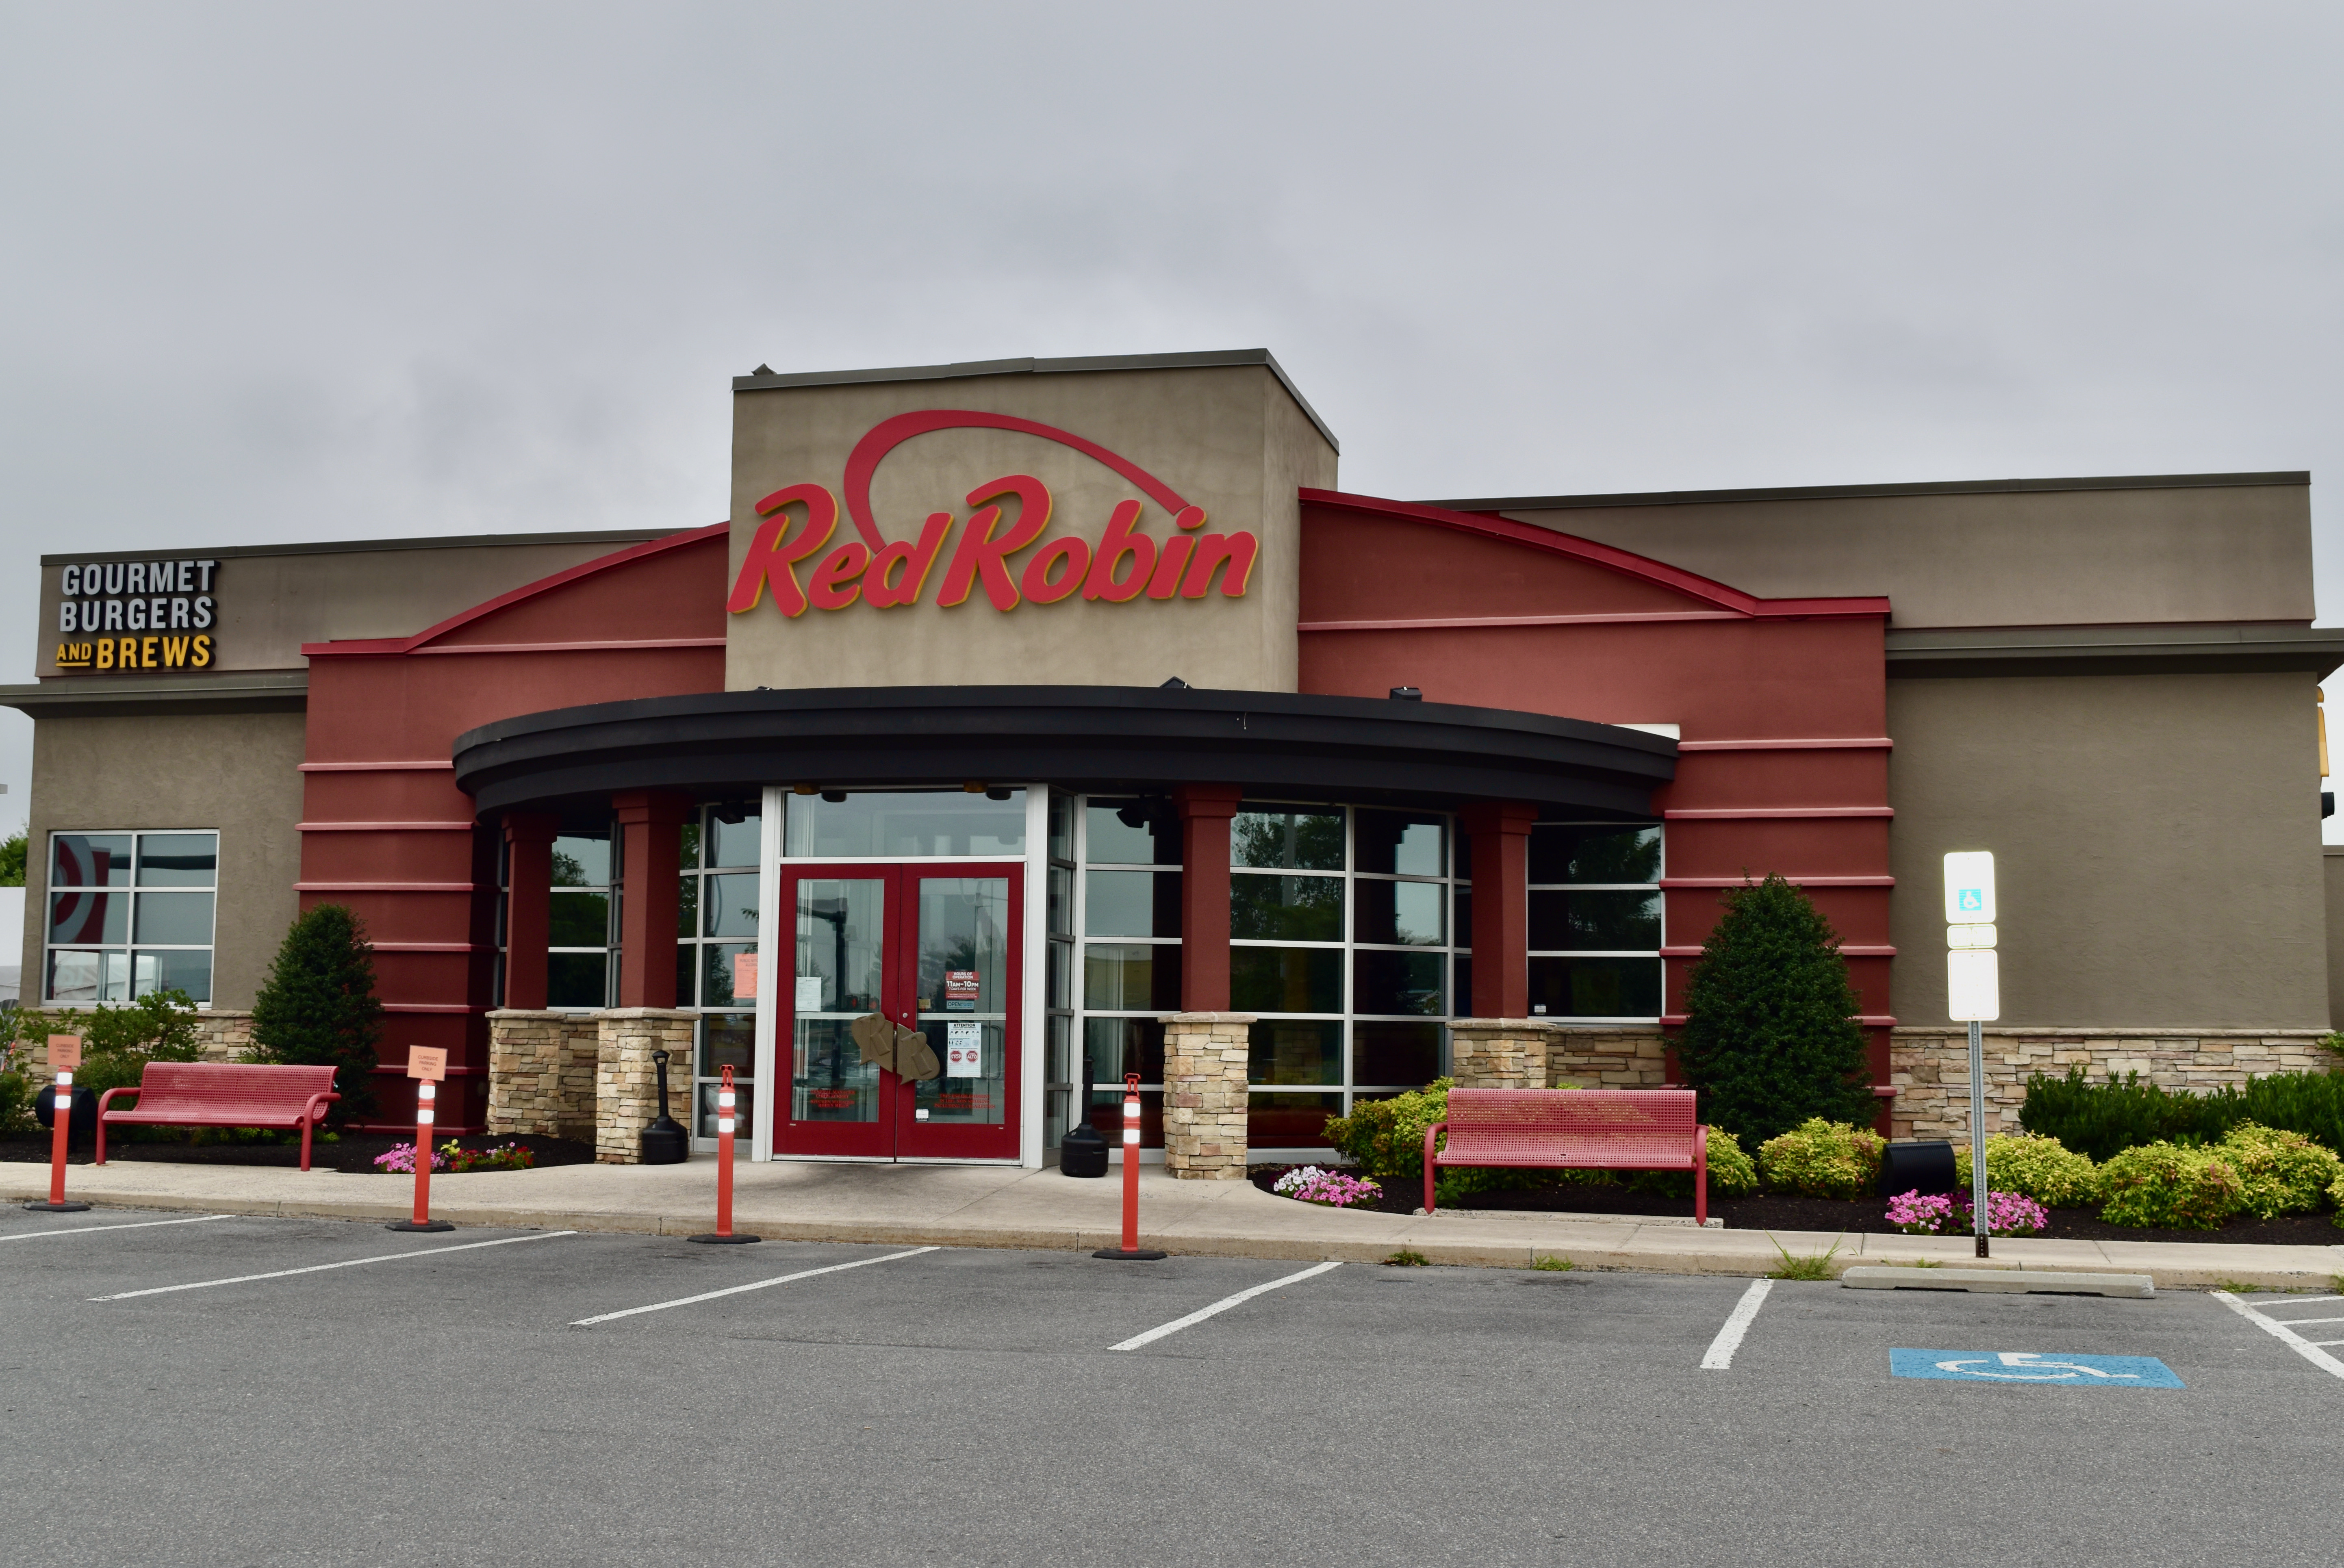 Exterior of the Red Robin Restaurant in Chambersburg, PA